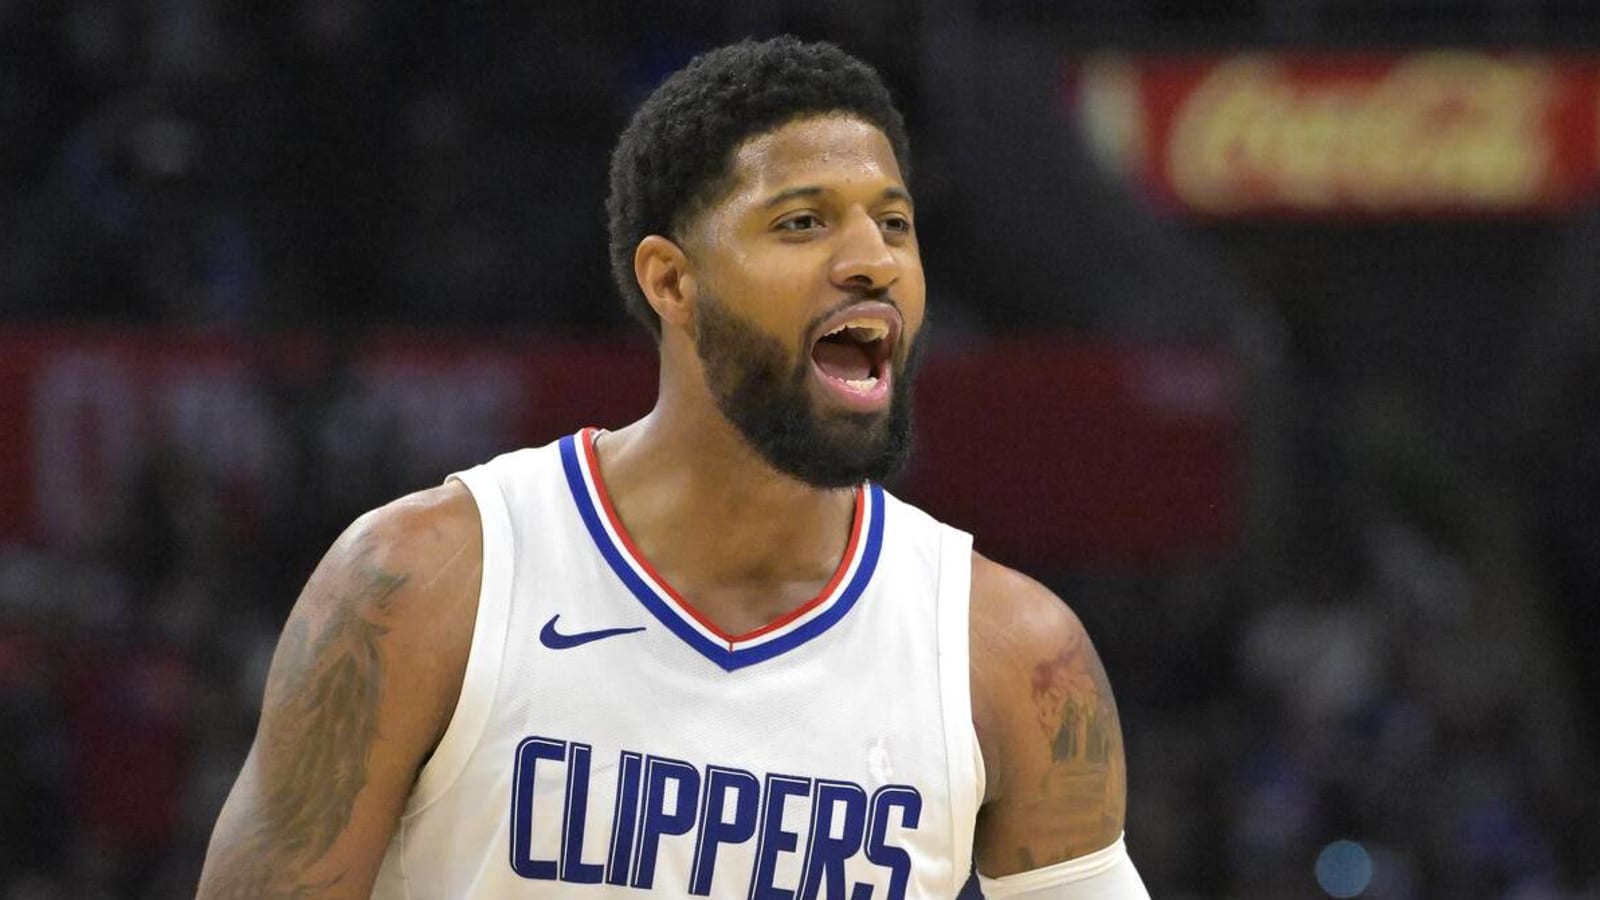 Clippers exec comments on Paul George extension talks